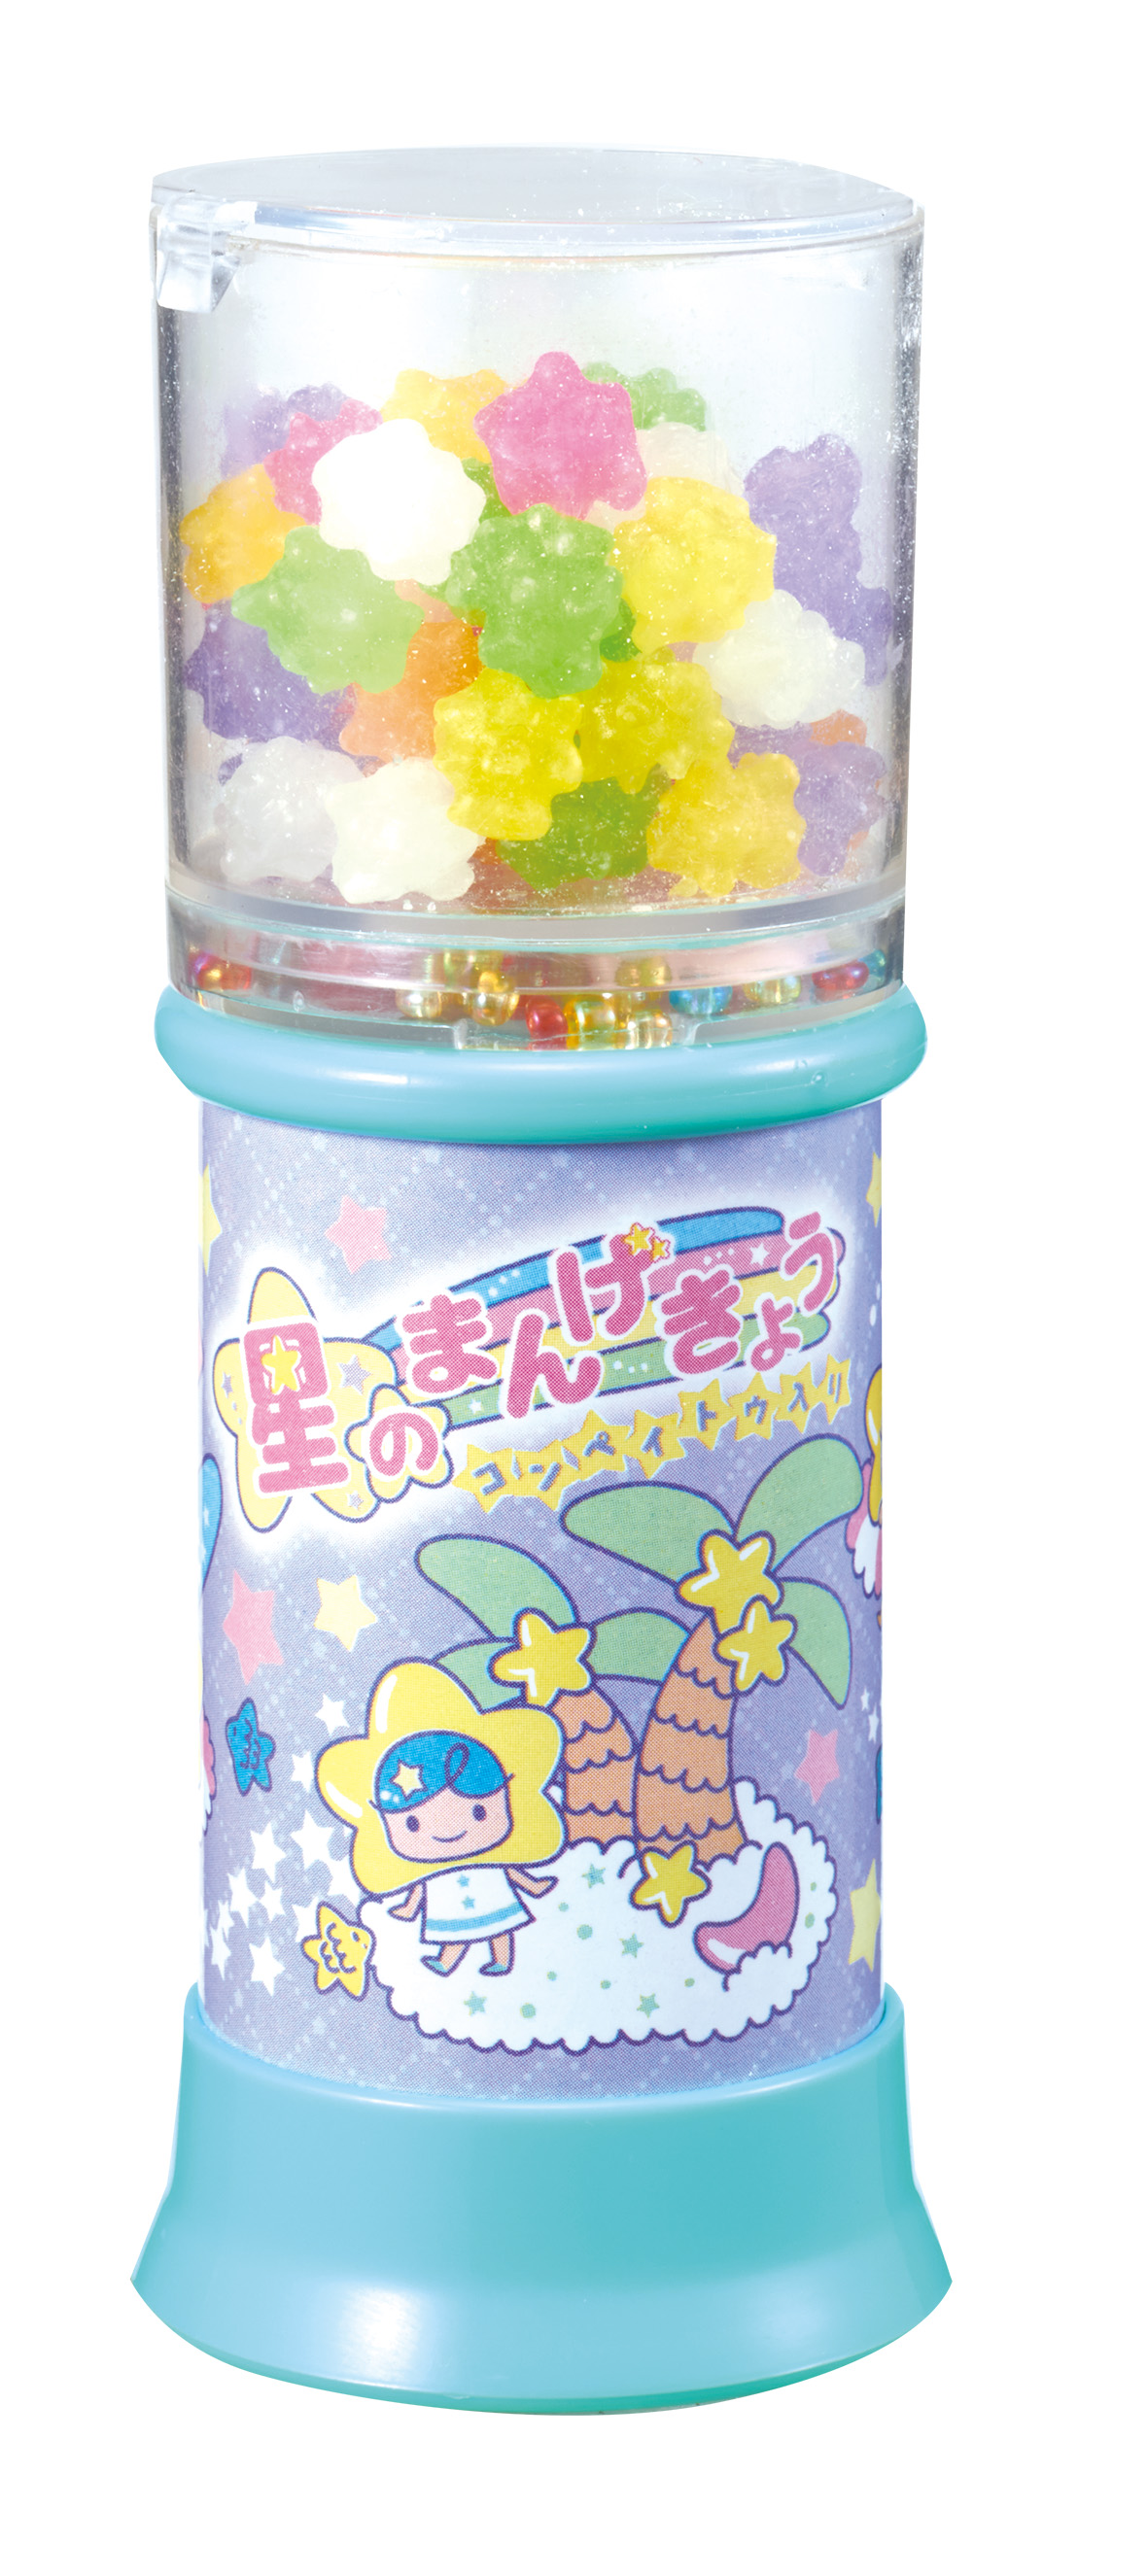 Toy x Candy Combi - Stars Kaleidoscope with Sweet